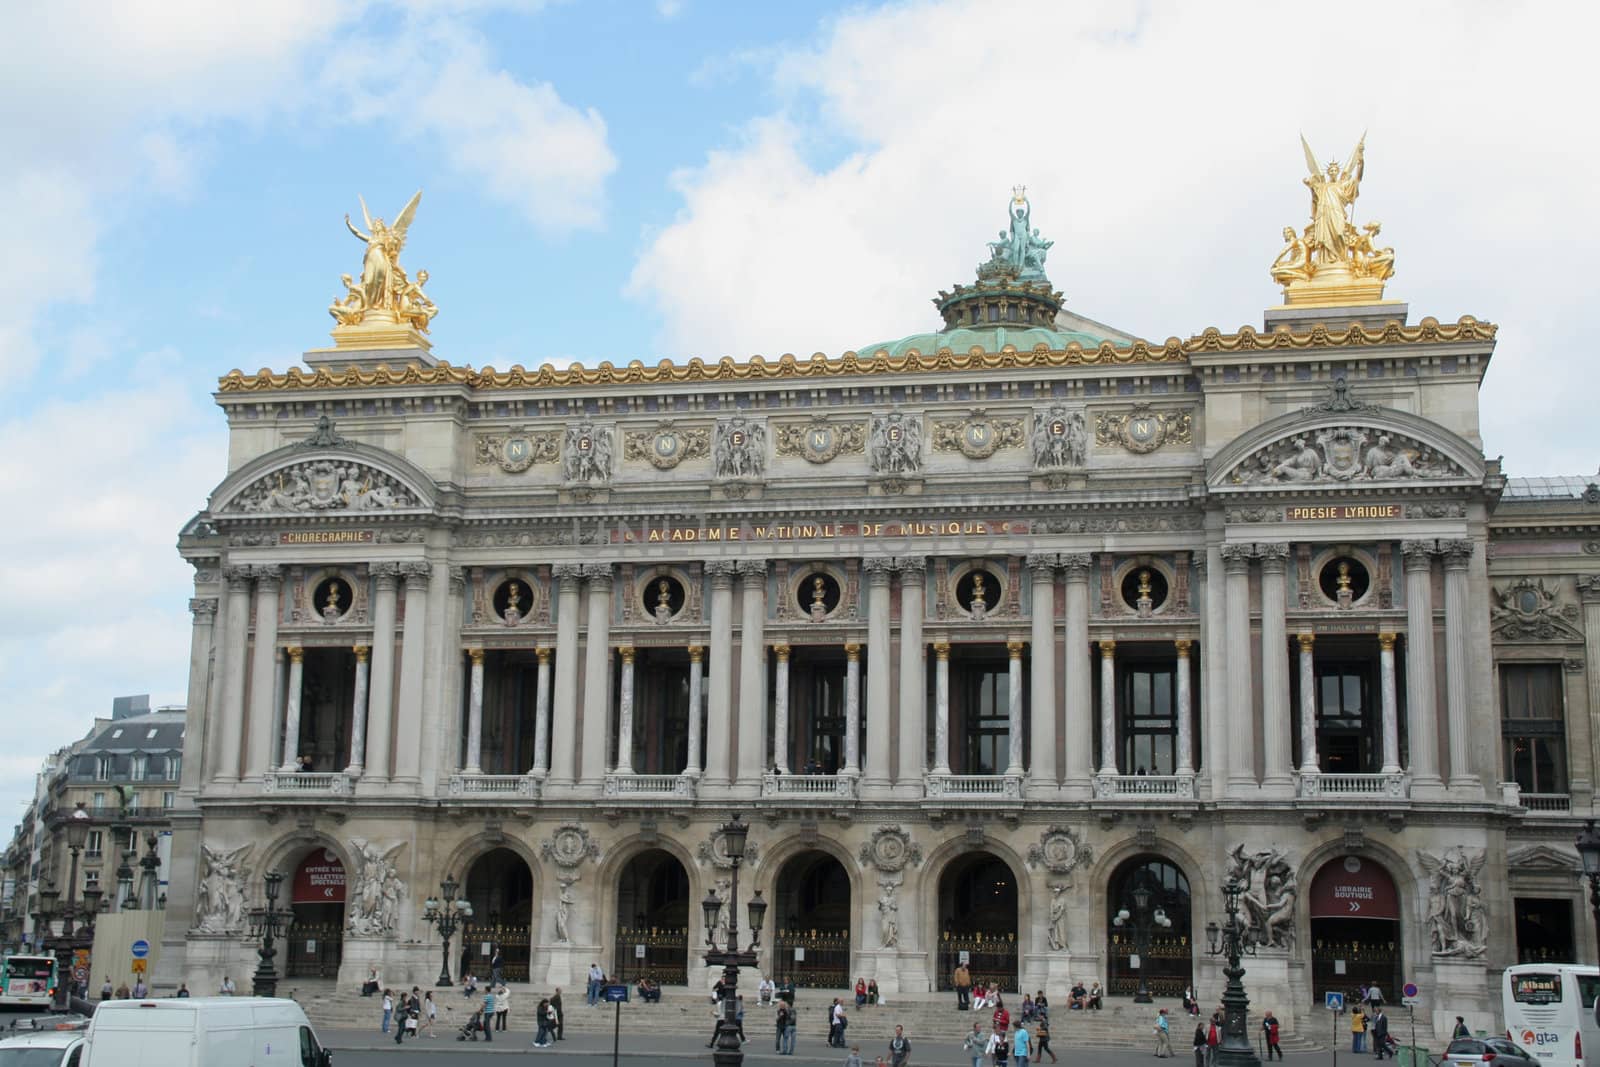 Houses on the streets of the capital of France - Paris. Grand Opera